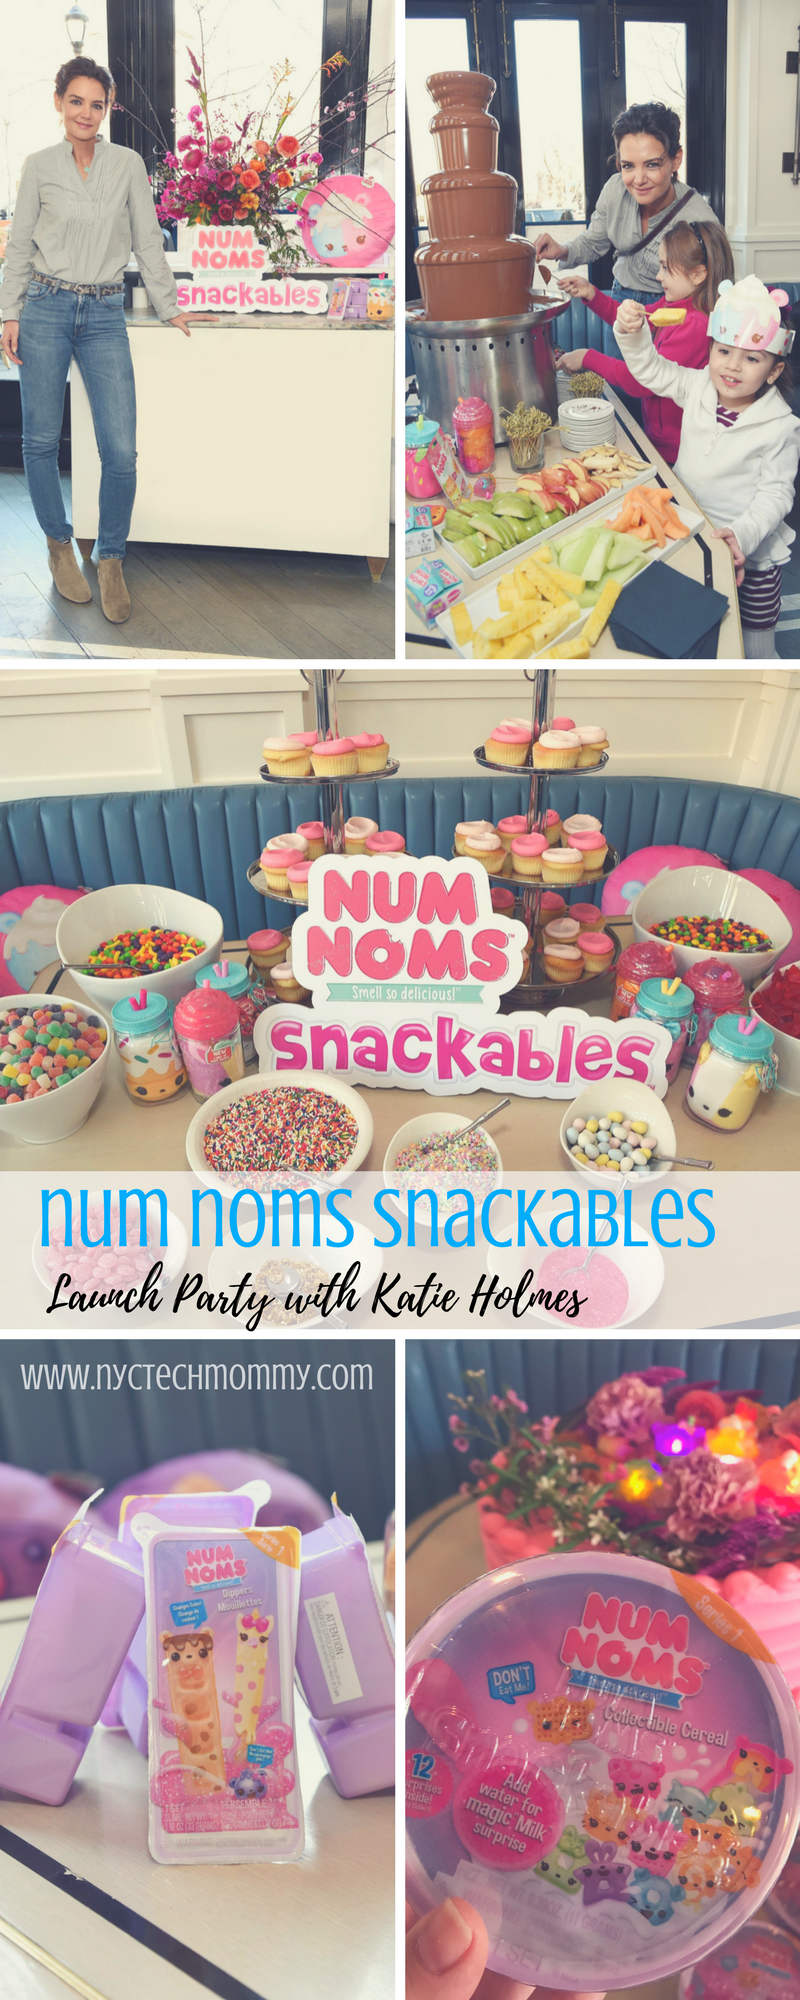 Num Noms Snackables are here! These adorable little collectables make playing with your "food" fun. Check out highlights from the Num Noms Snackables Launch Party with Katie Holmes! #numnoms